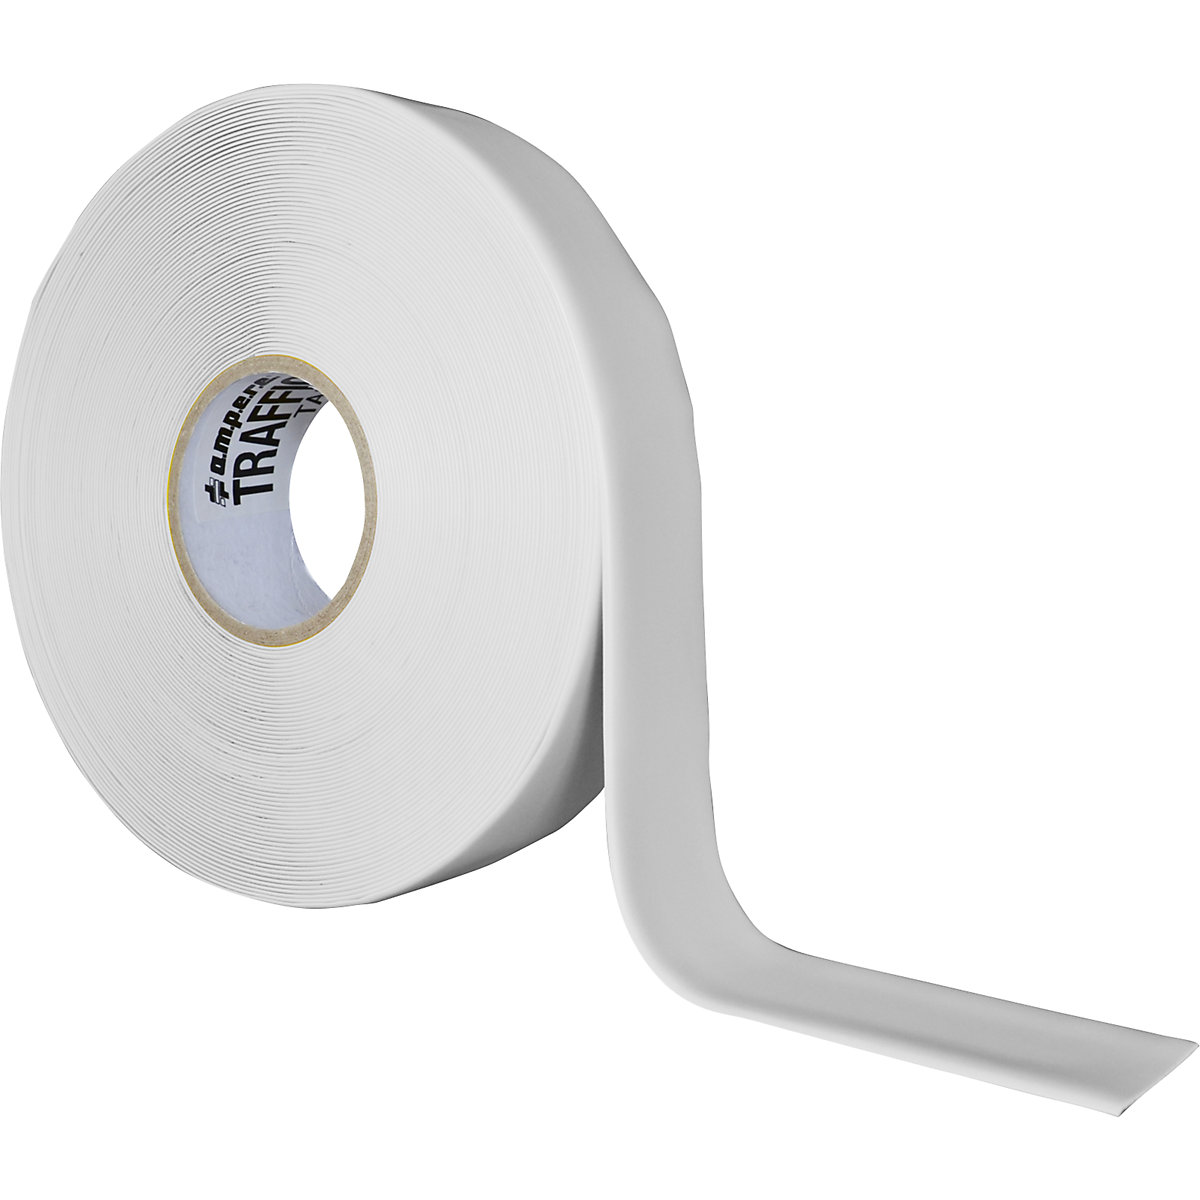 Floor marking tape, extra strong - Ampere